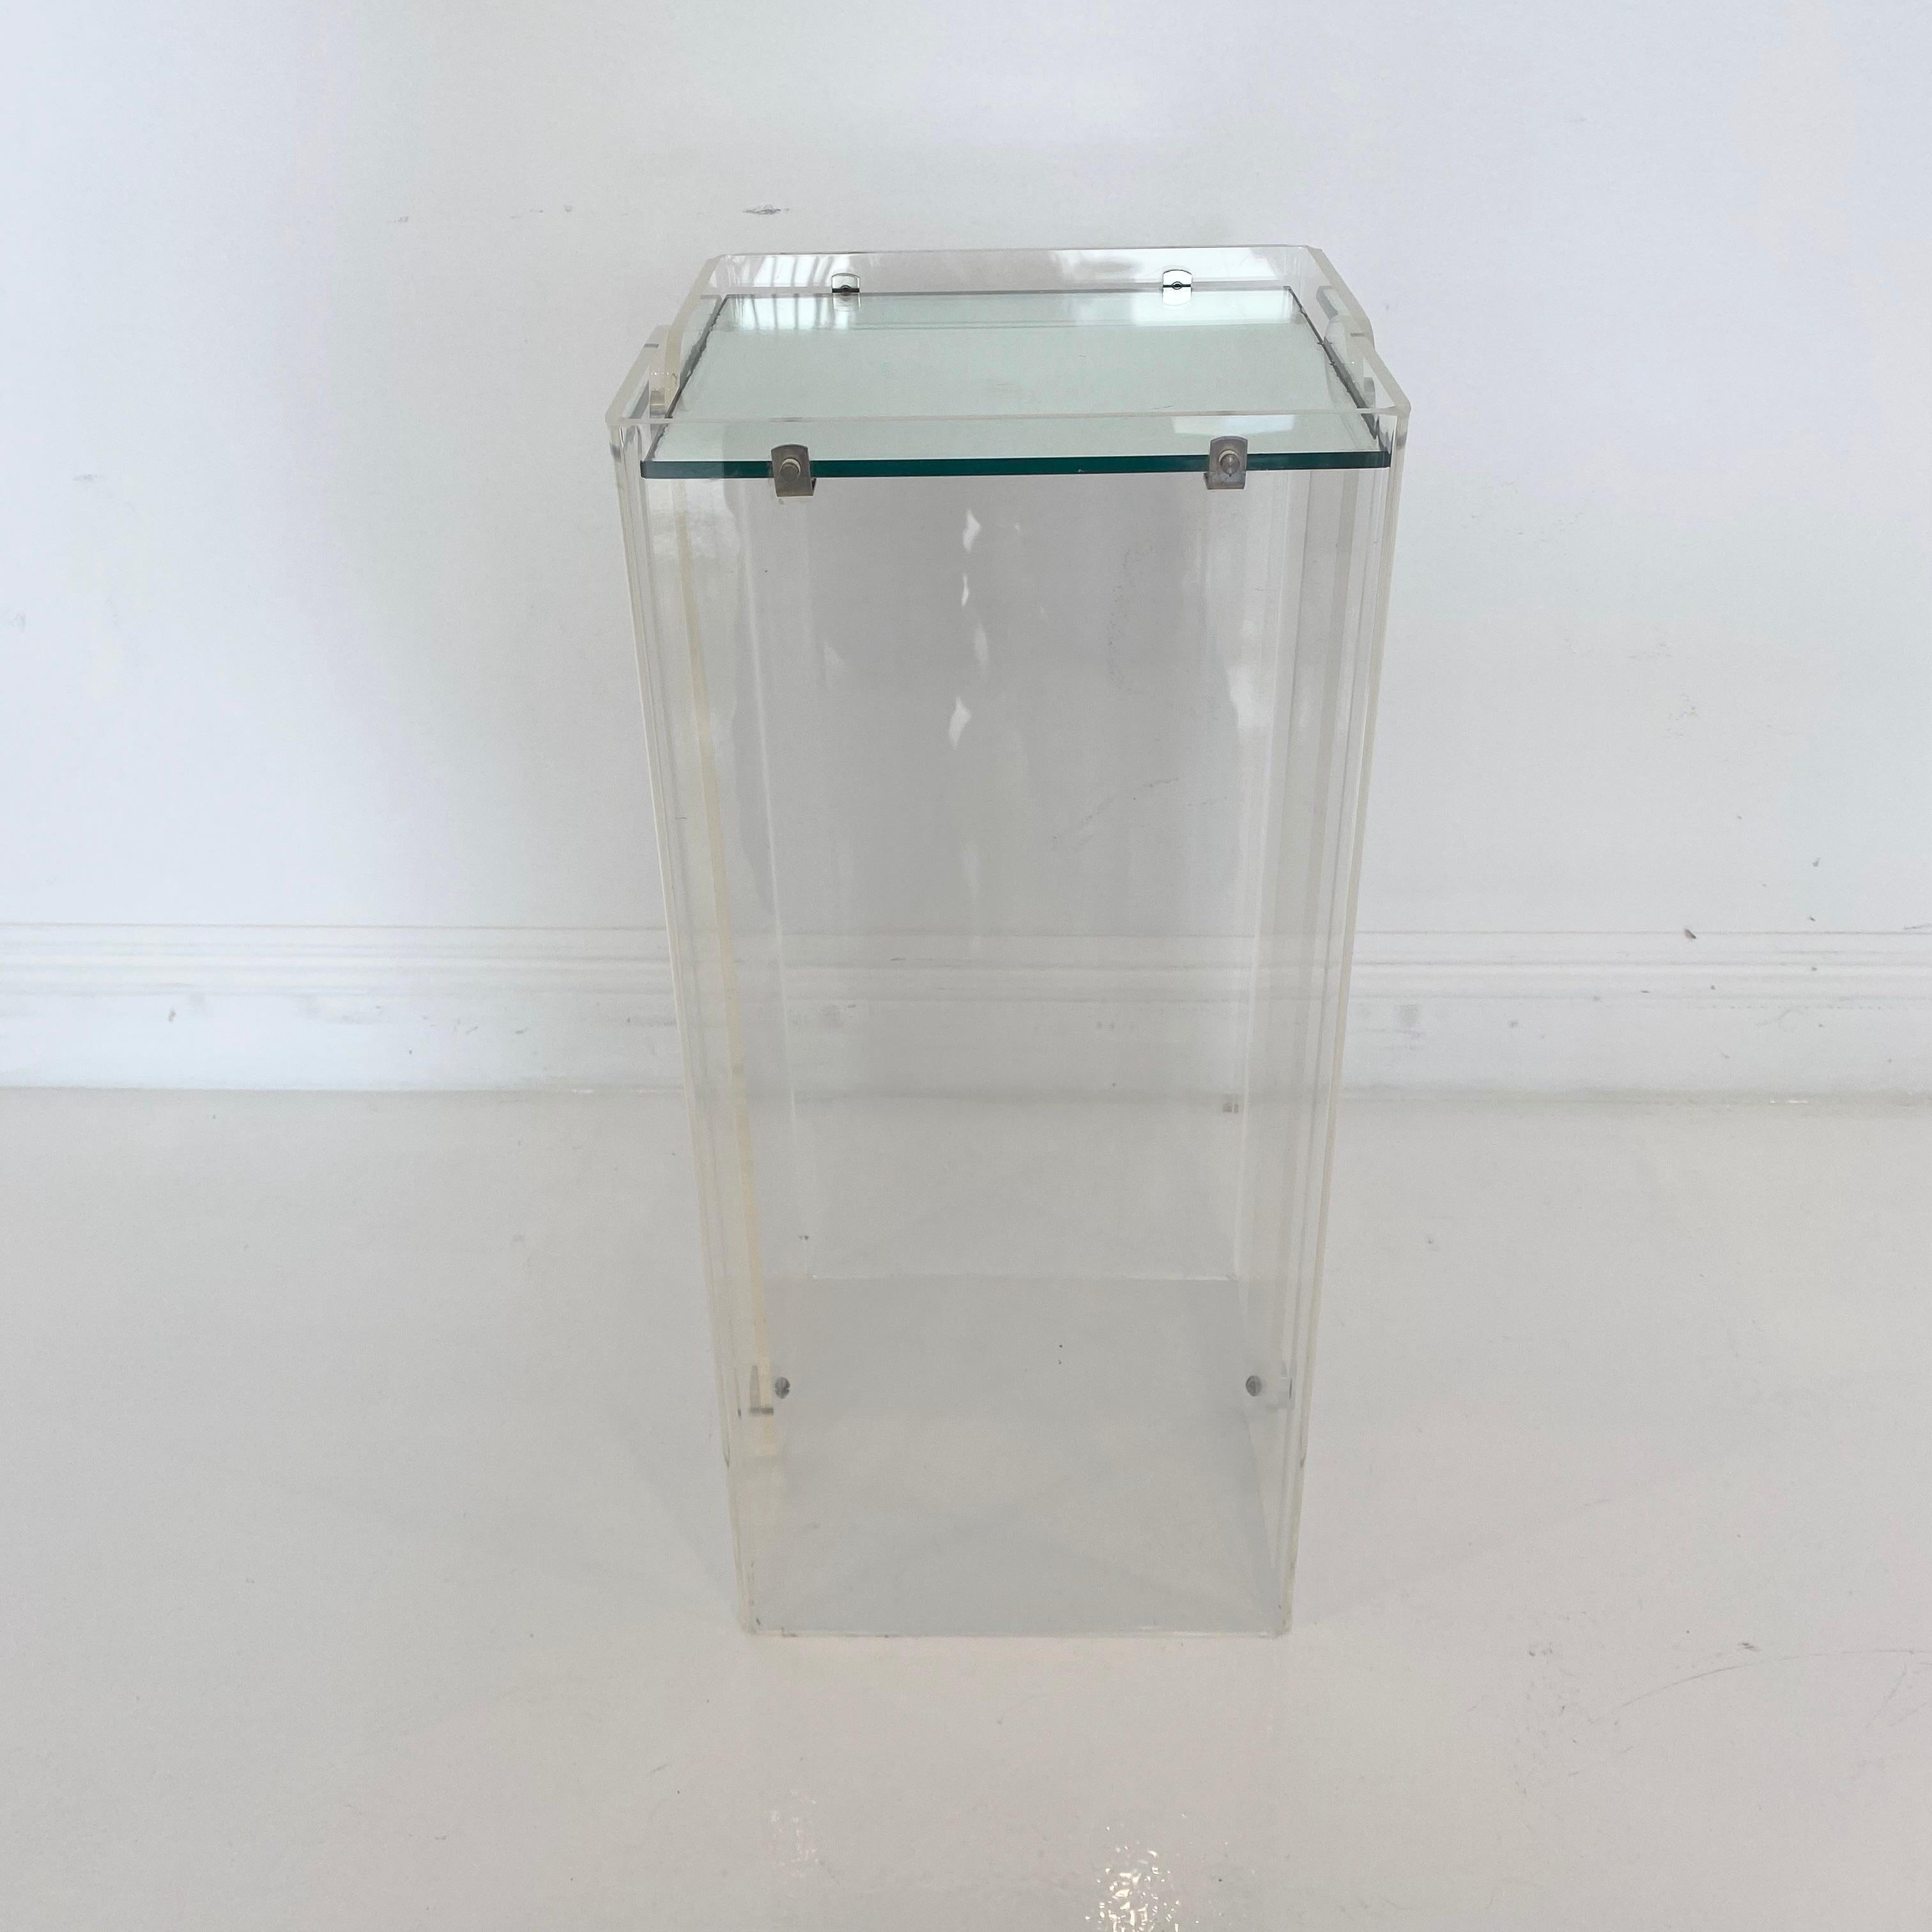 Unique pedestal made of Lucite. 2 ft tall. Clear base with flat rectangular mirror at top. Silver metal accent bolts at the top and bottom. Great accent piece and display item. Good vintage condition.